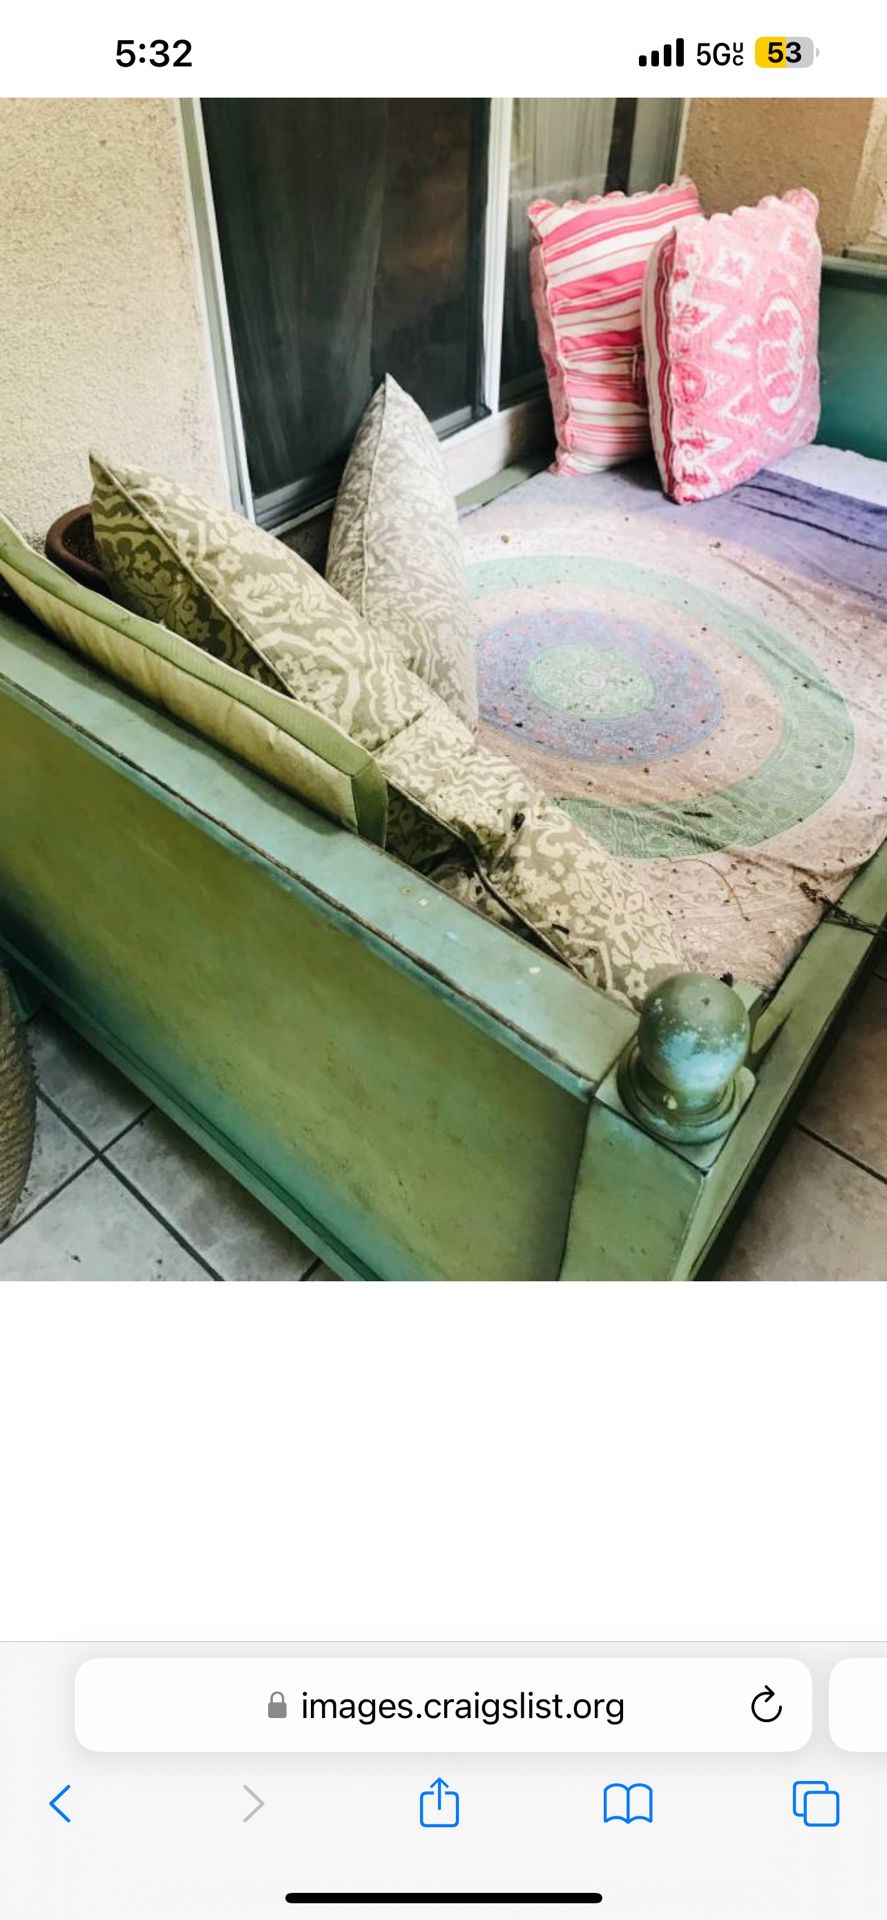 Green Day Bed (Antique)